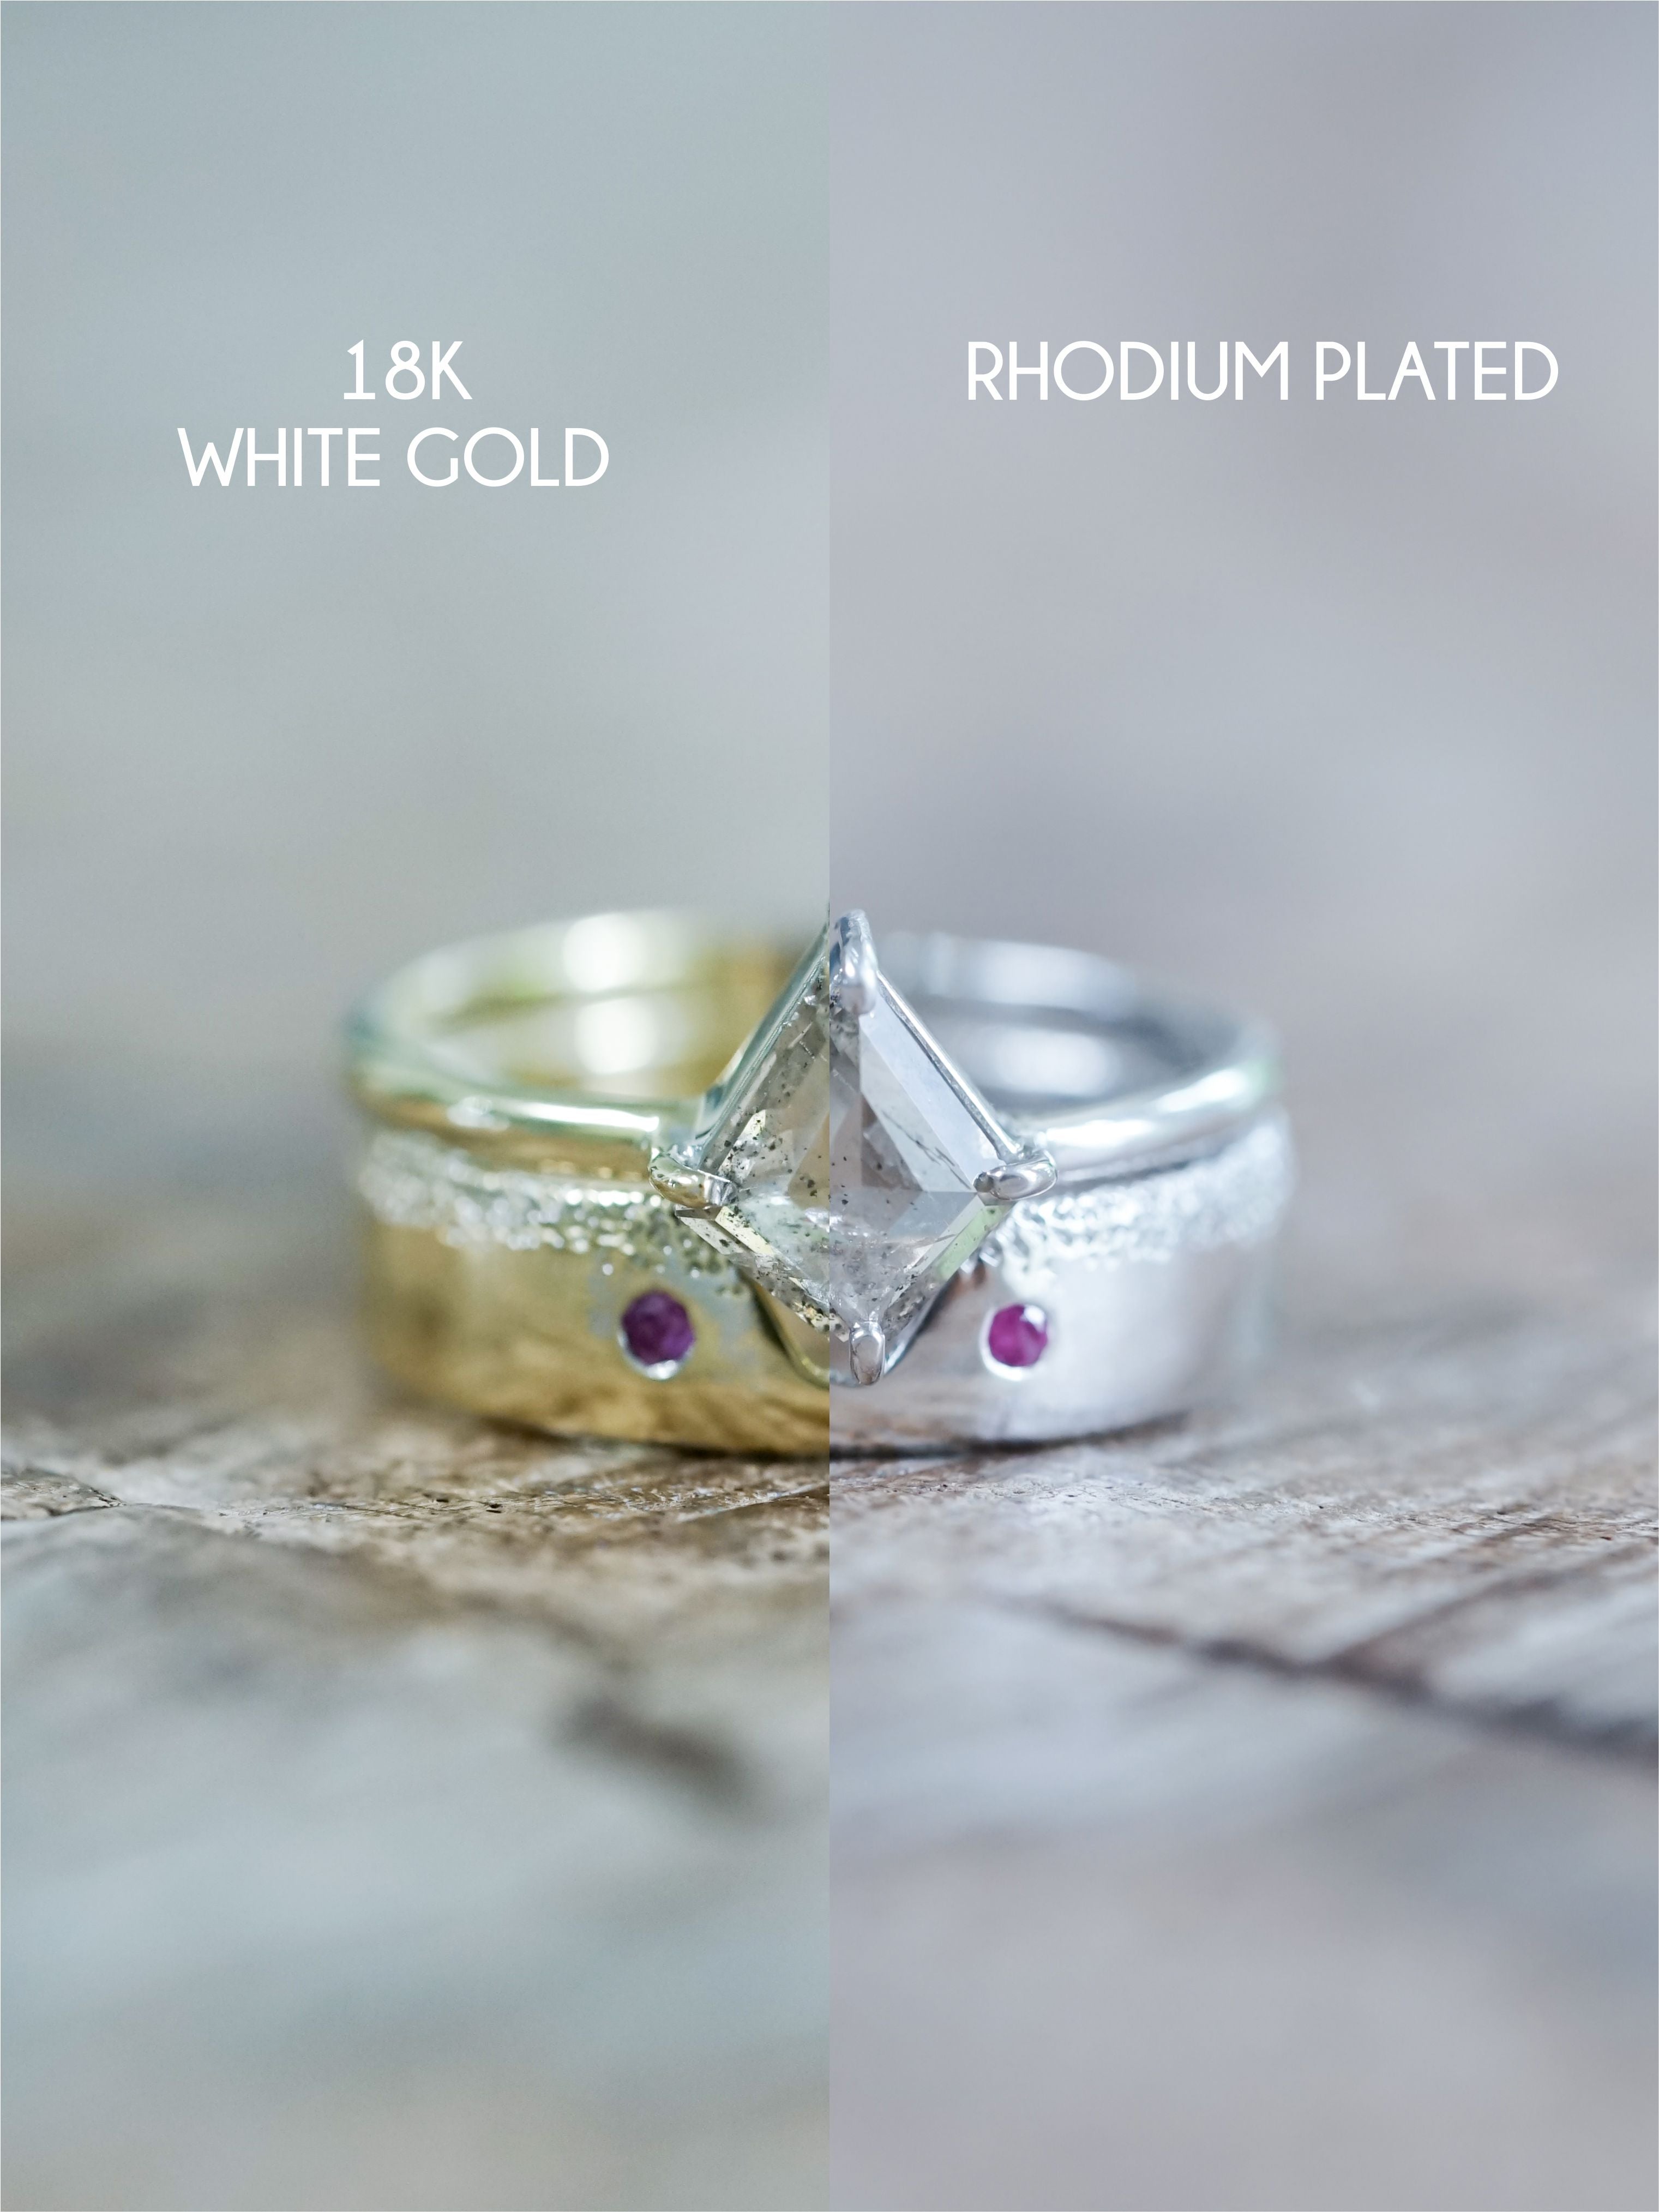 Rhodium plating for beginners, Do it the cheap and easy way 